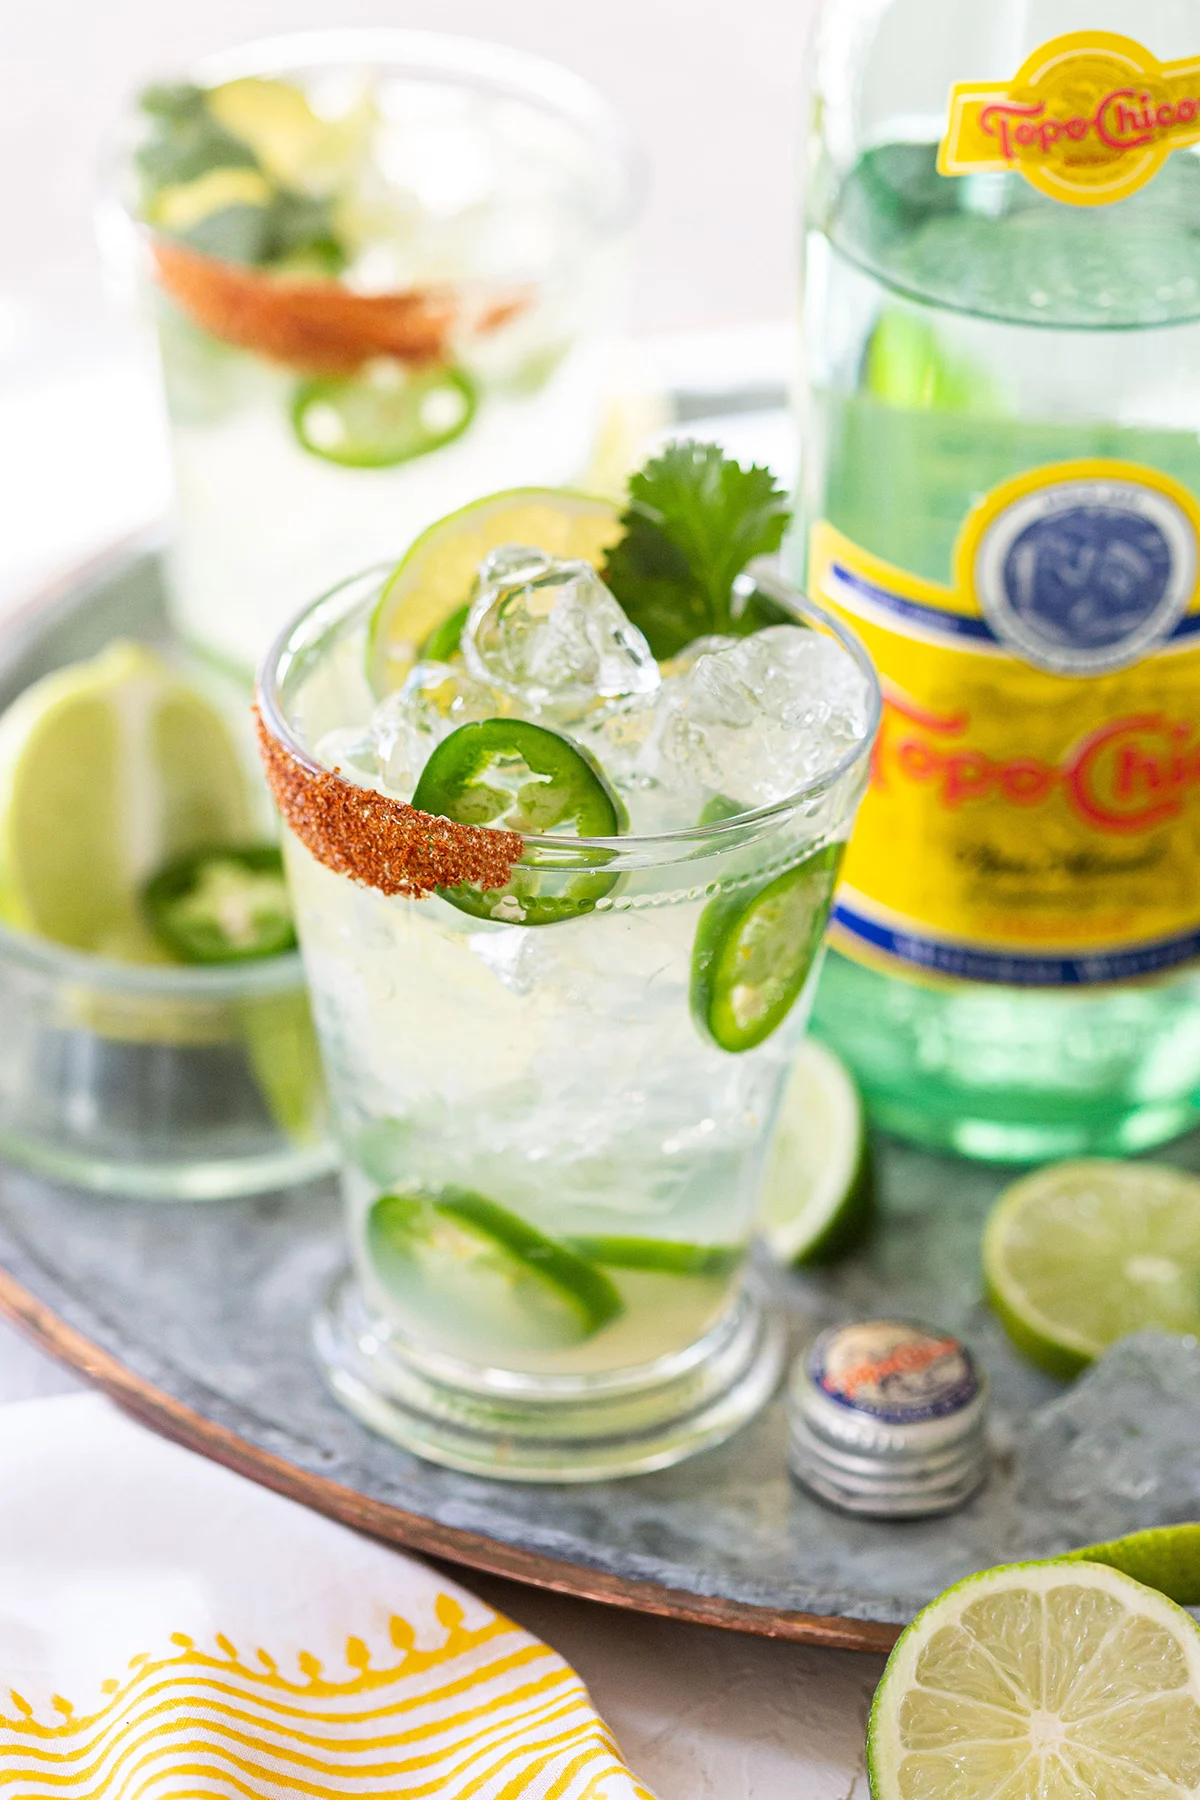 A pint glass filled with ranch water and jalapeno slices sits in front of a bottle of Topo Chico.